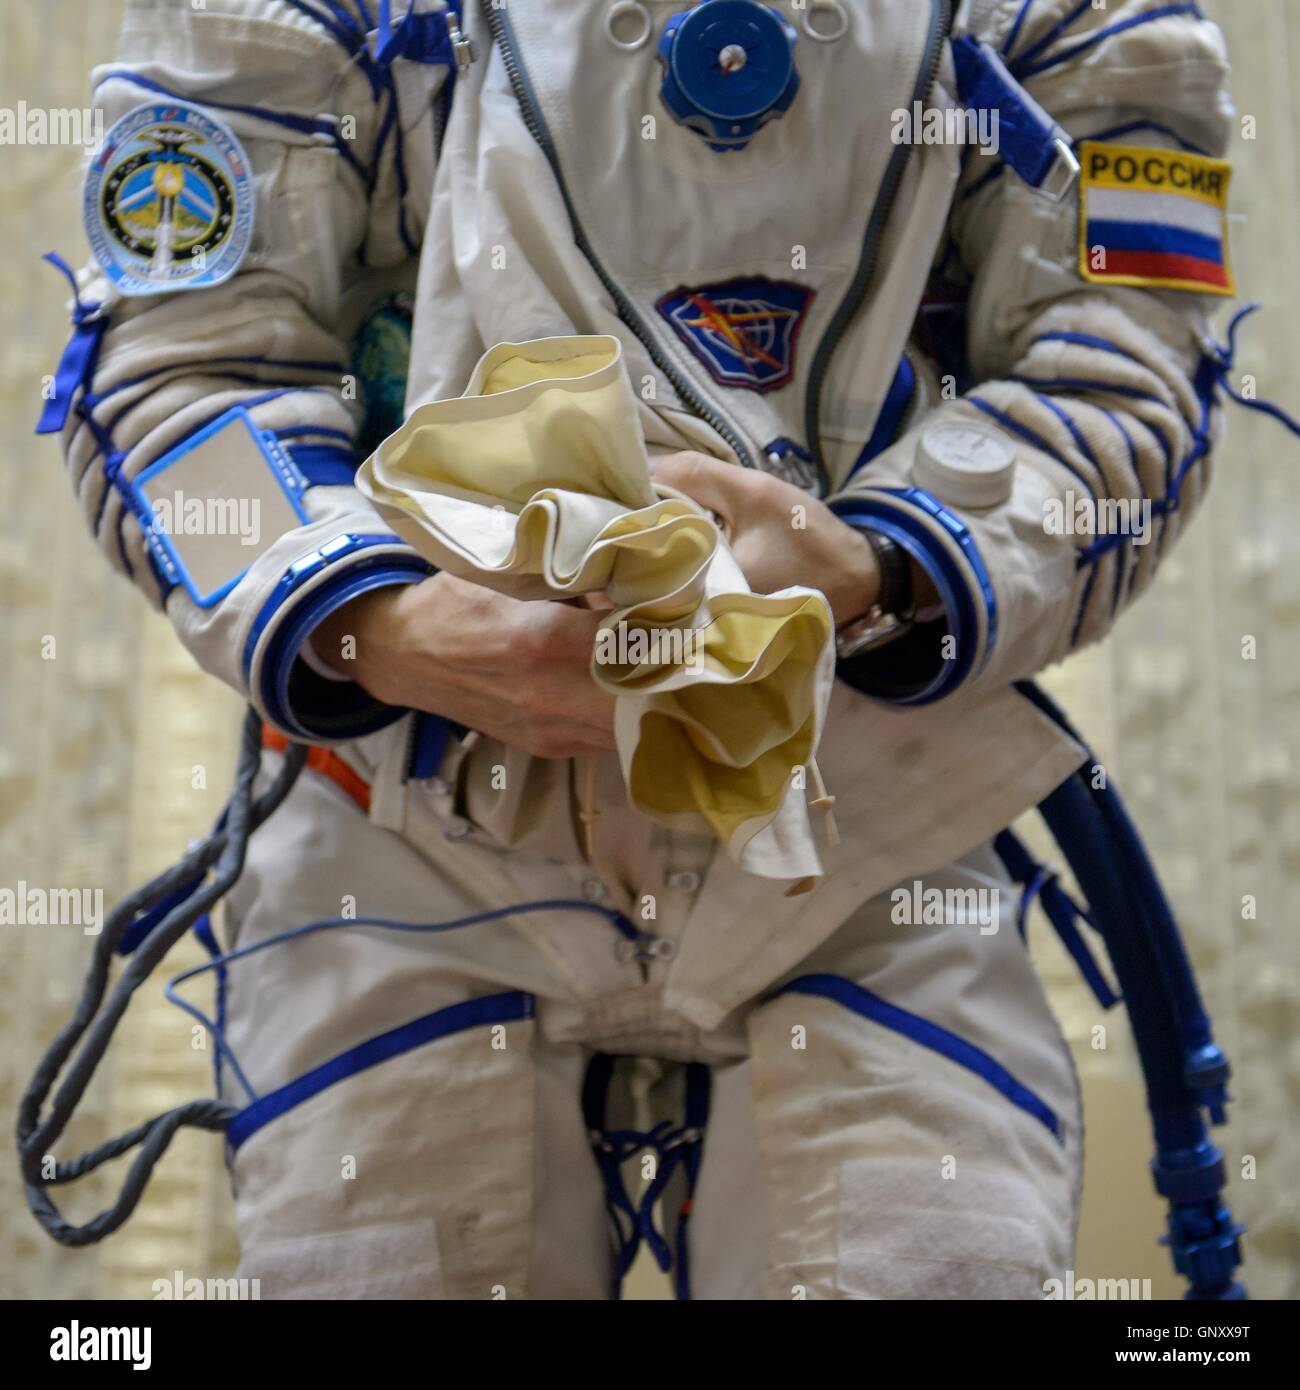 International Space Station Expedition 49-50 prime crew Russian cosmonaut Sergei Ryzhikov readies his Sokol spacesuit in preparation for the Soyuz qualification exams at the Gagarin Cosmonaut Training Center August 31, 2016 at Star City, Russia. Stock Photo